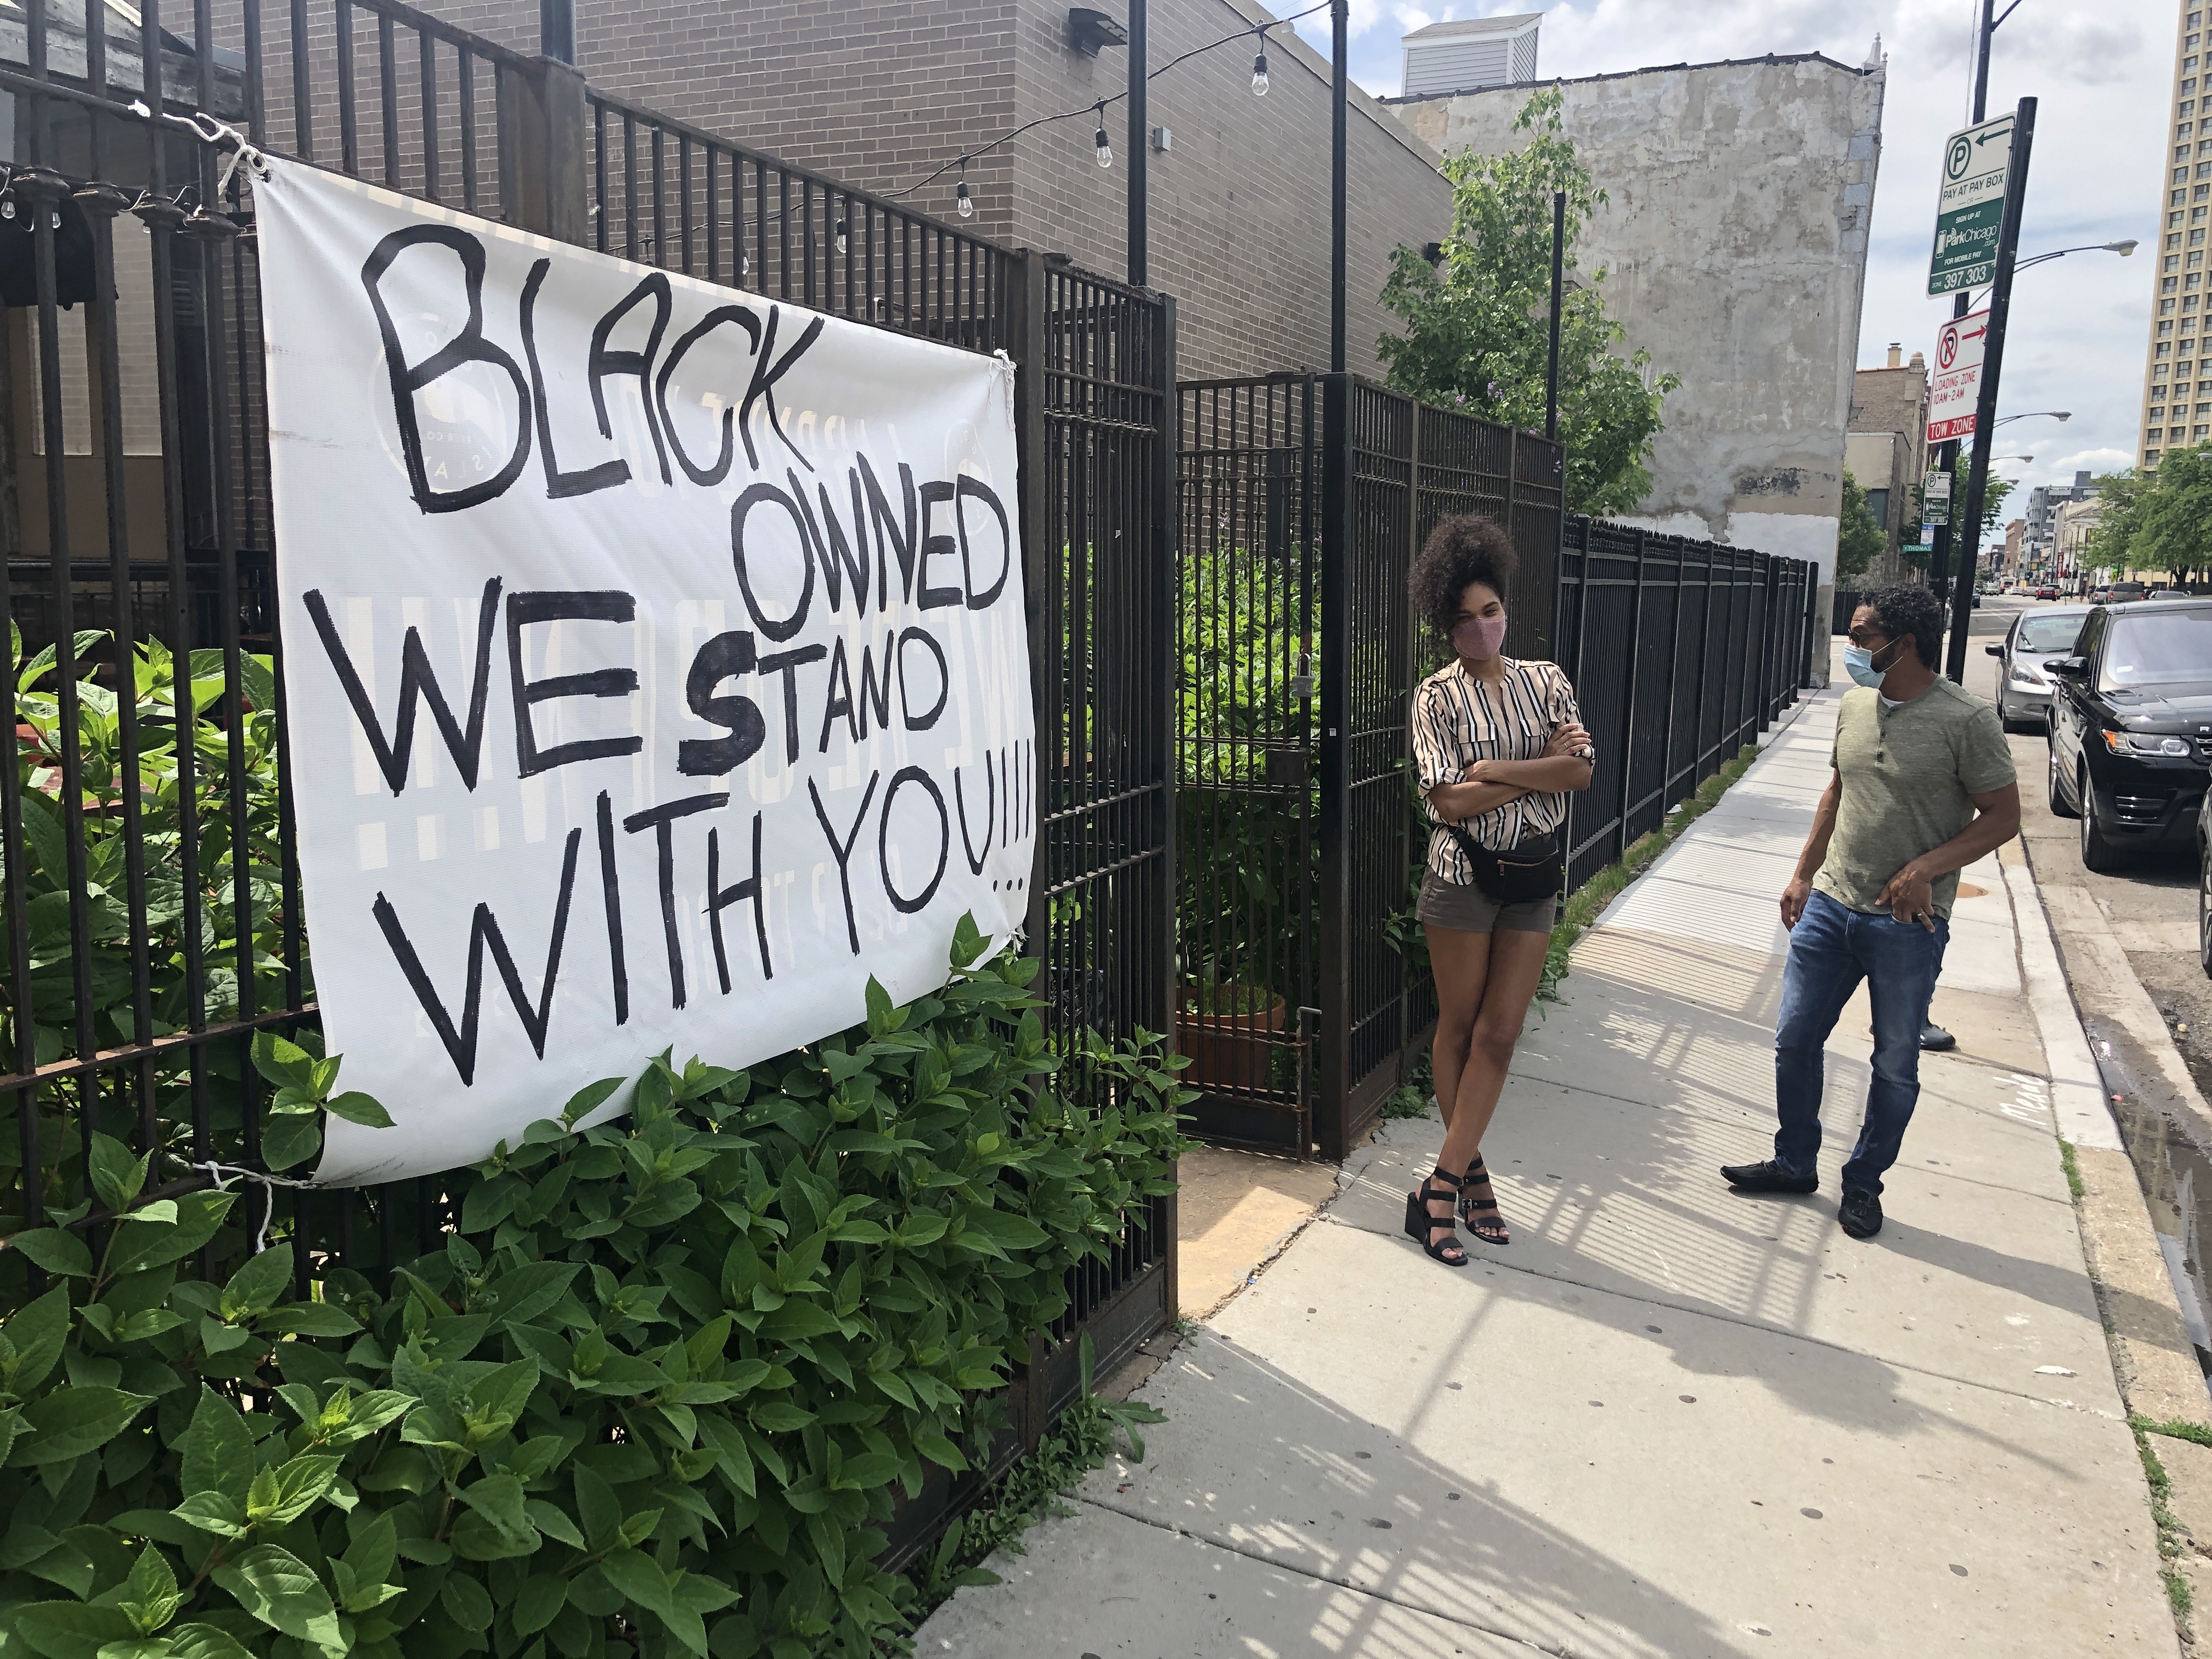 Two people stand outside a black fence where a sign hangs. It reads “Black owned, we stand with you.”